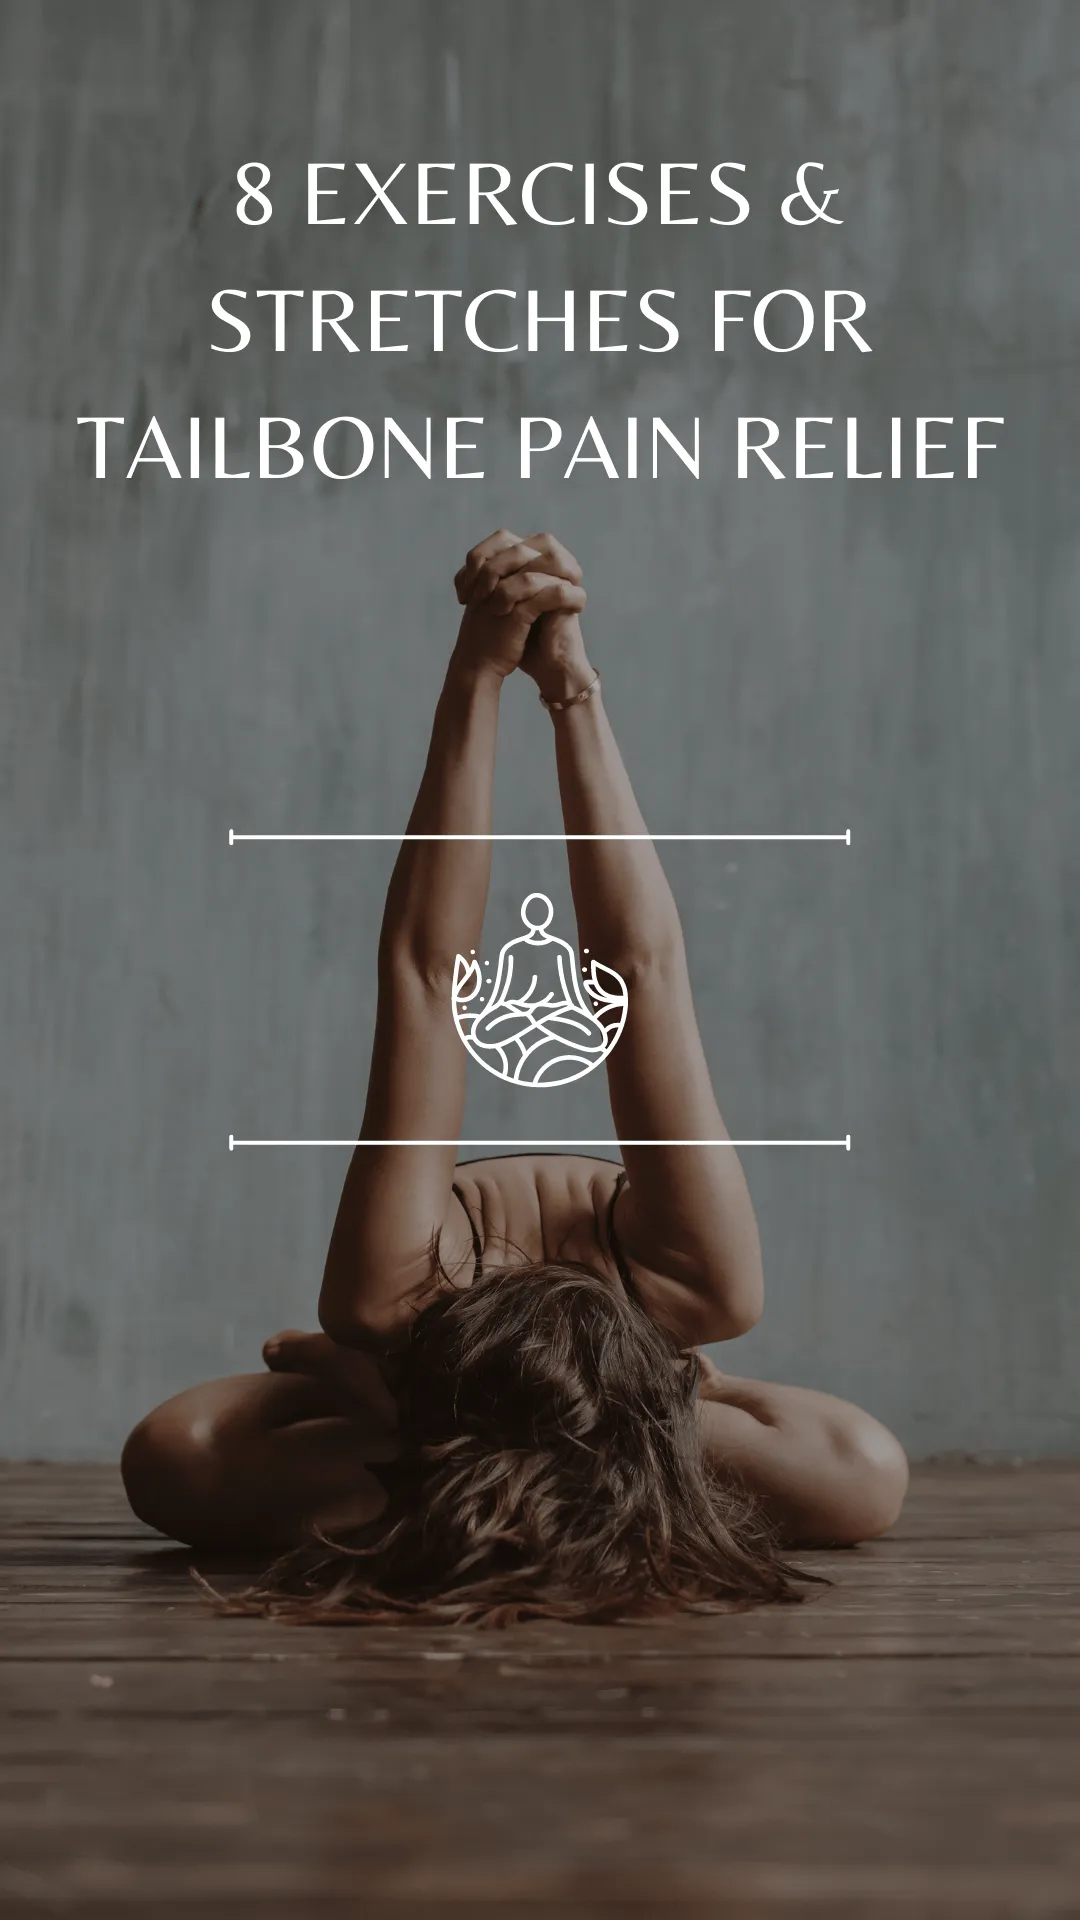 8 Exercises & Stretches for Tailbone Pain Relief